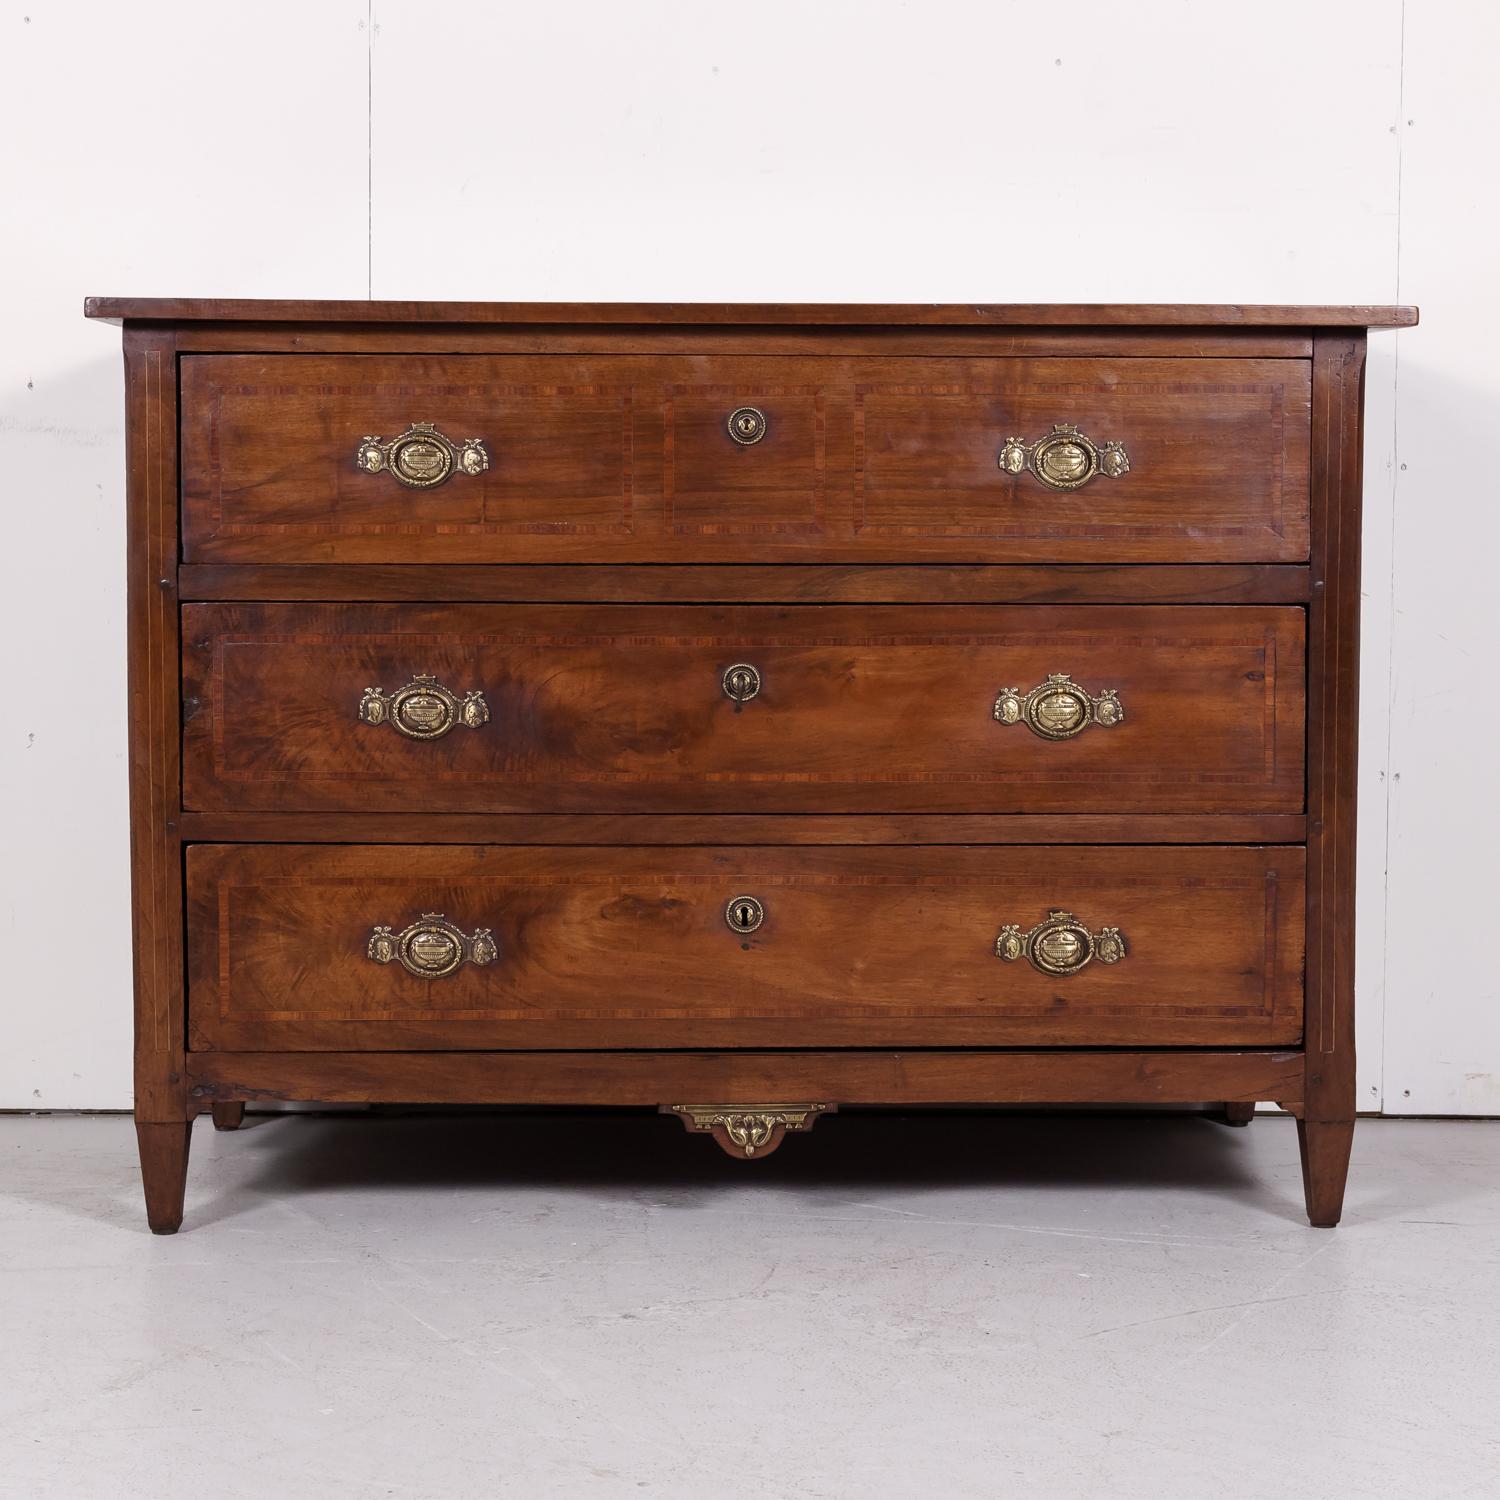 Late 18th Century 18th Century Period Louis XVI Walnut and Parquetry Commode